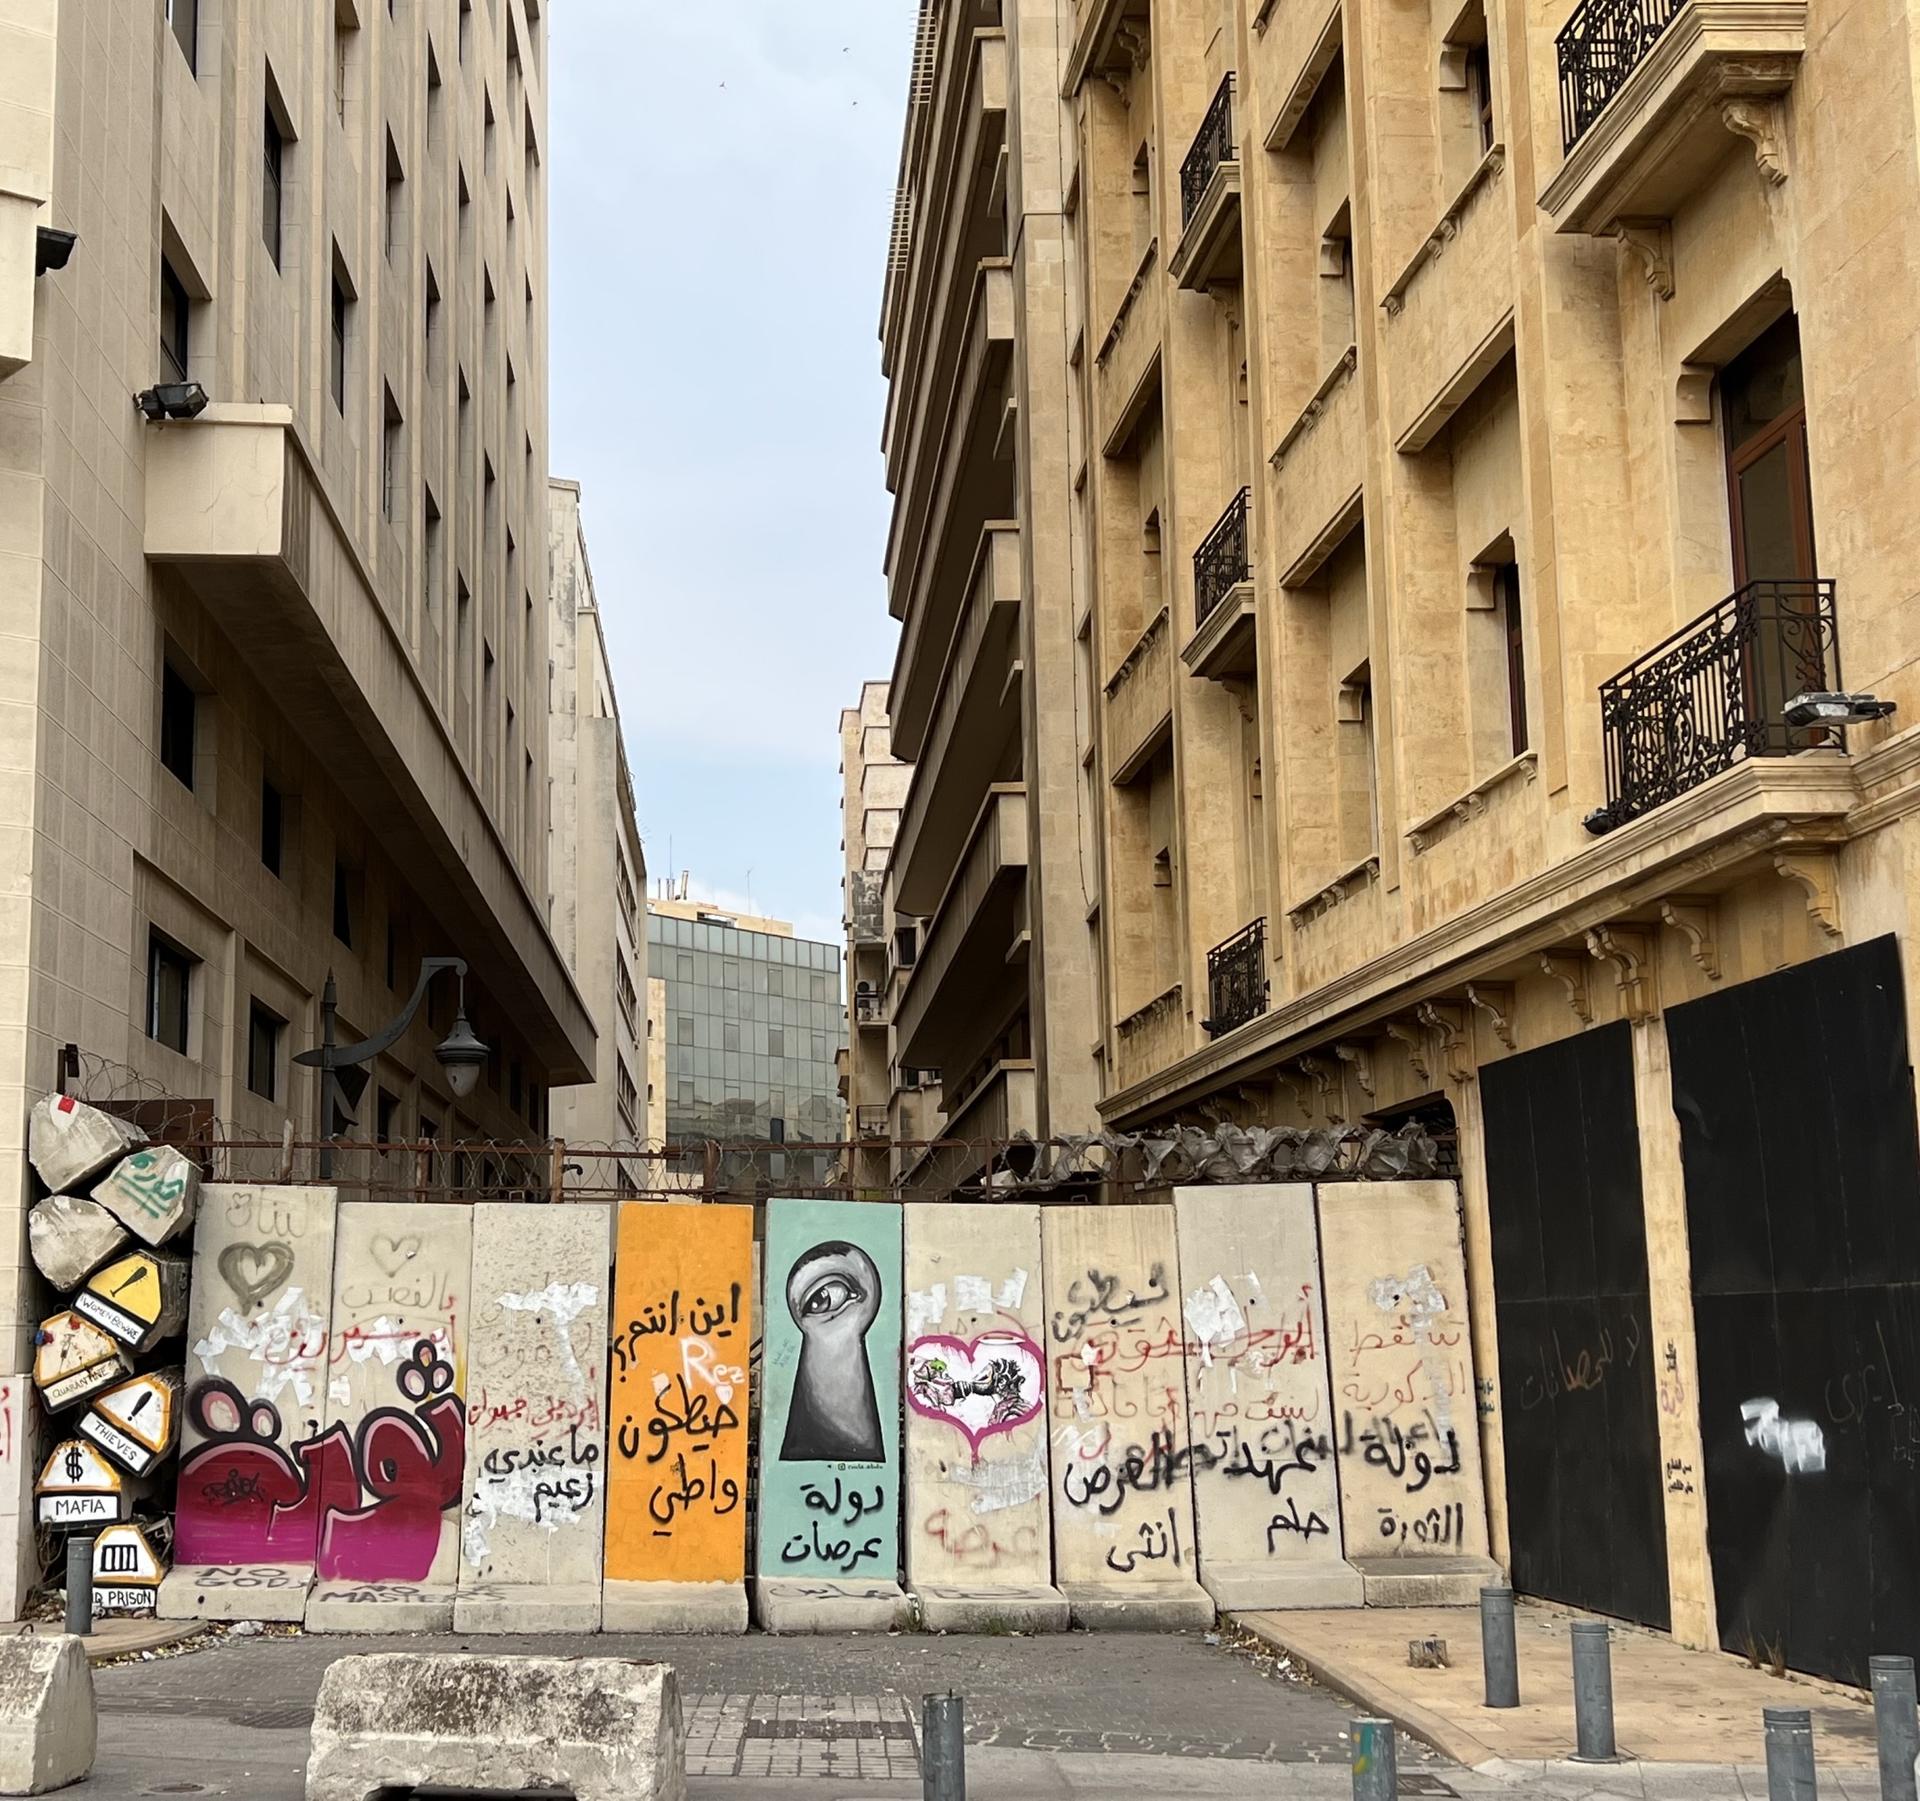 Some streets in Beirut have been barricaded by blast walls. Protesters use them as canvas for anti-government graffiti.